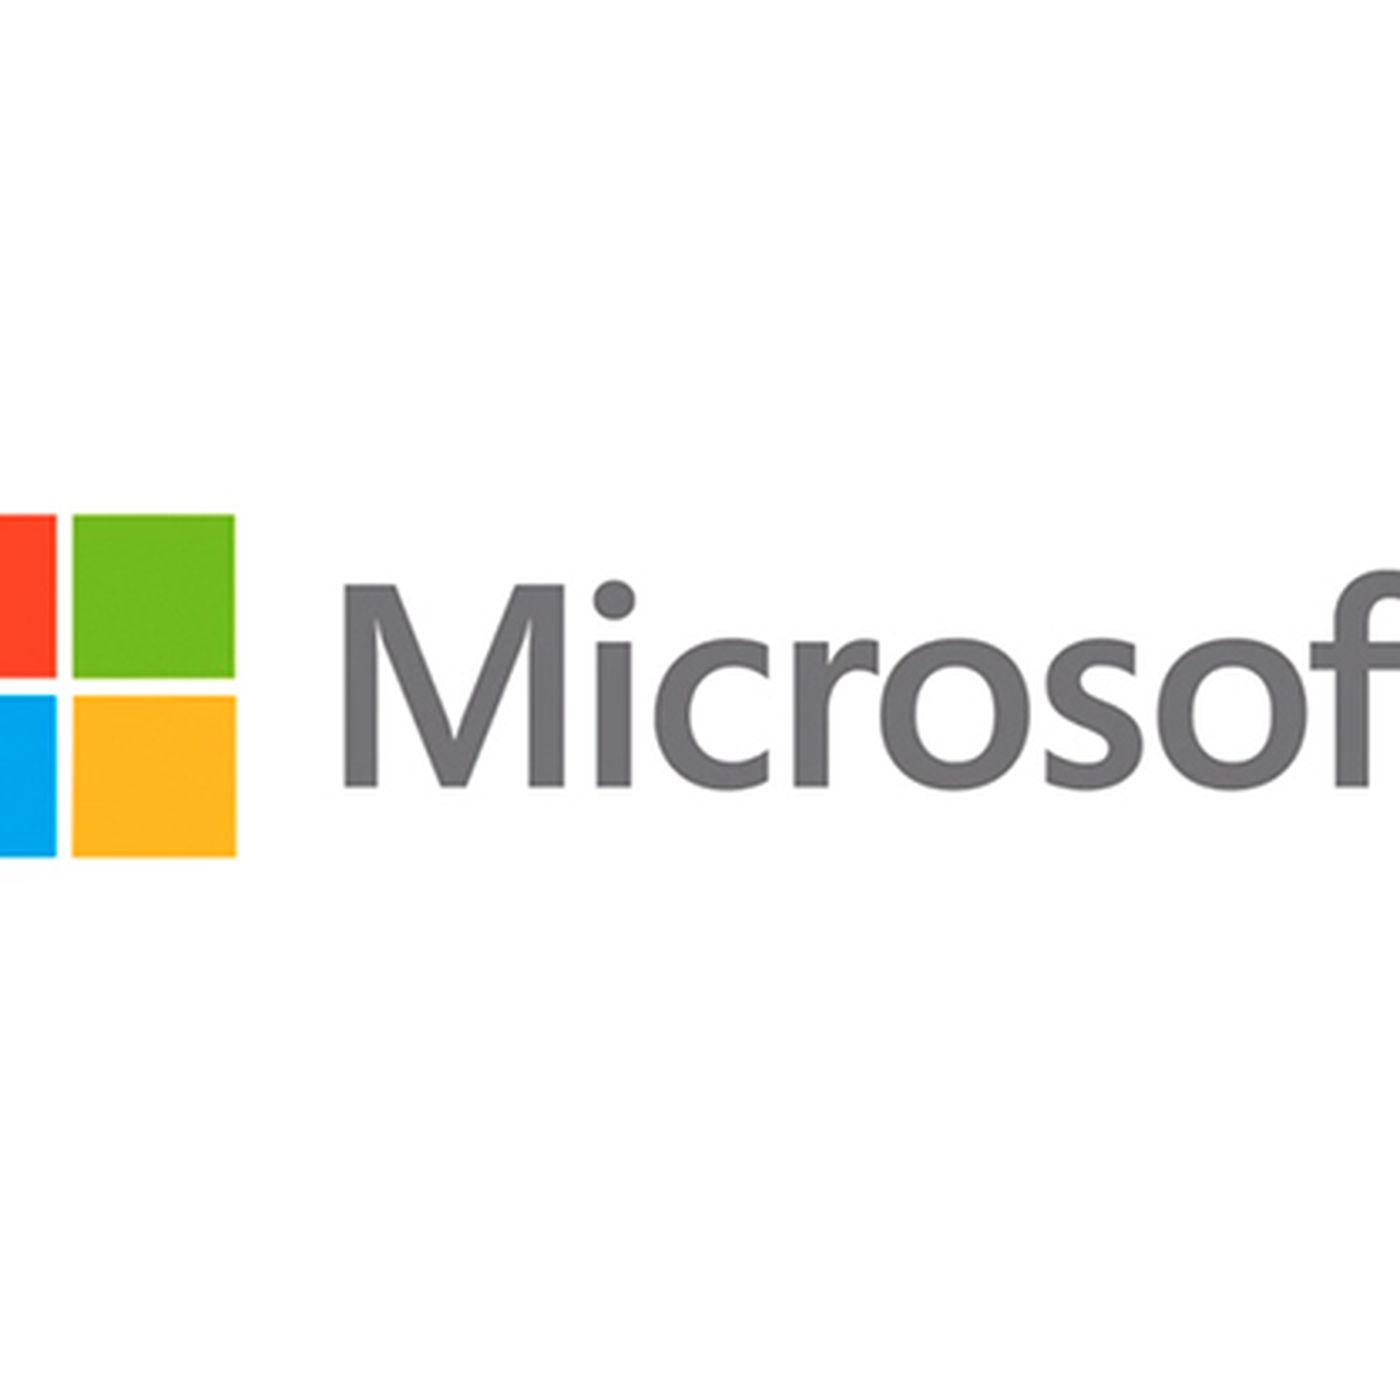 Newest Microsoft Logo - Microsoft unveils its new logo, the first major change in 25 years ...